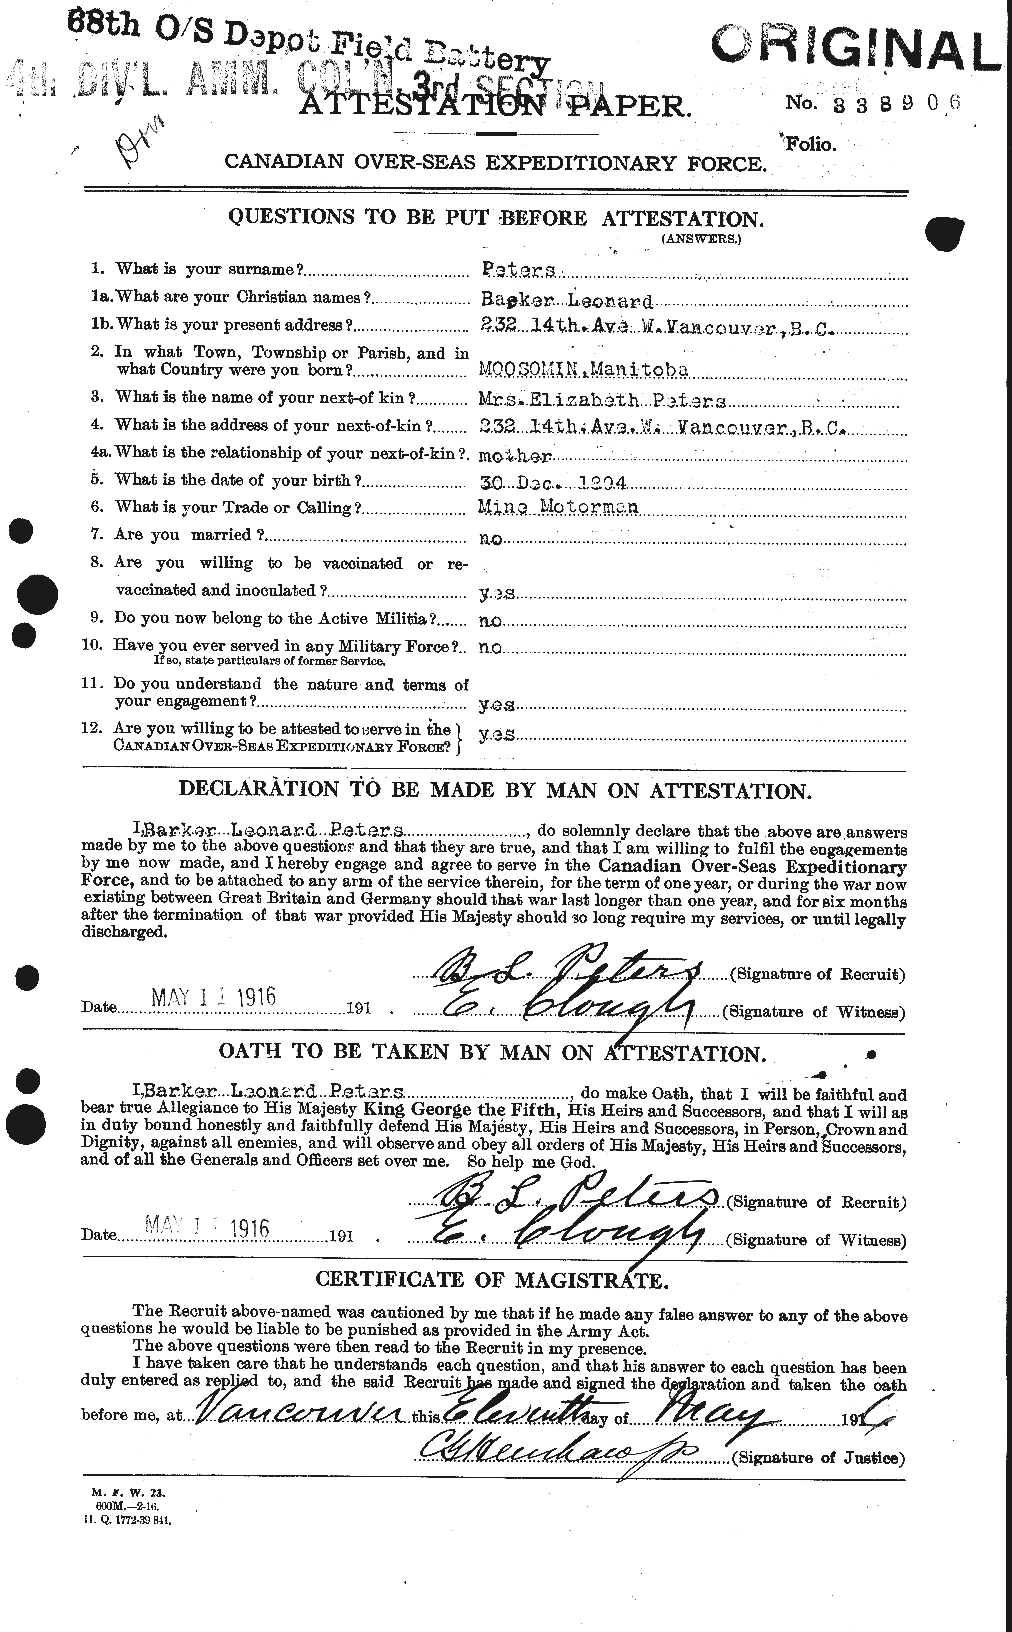 Personnel Records of the First World War - CEF 575359a